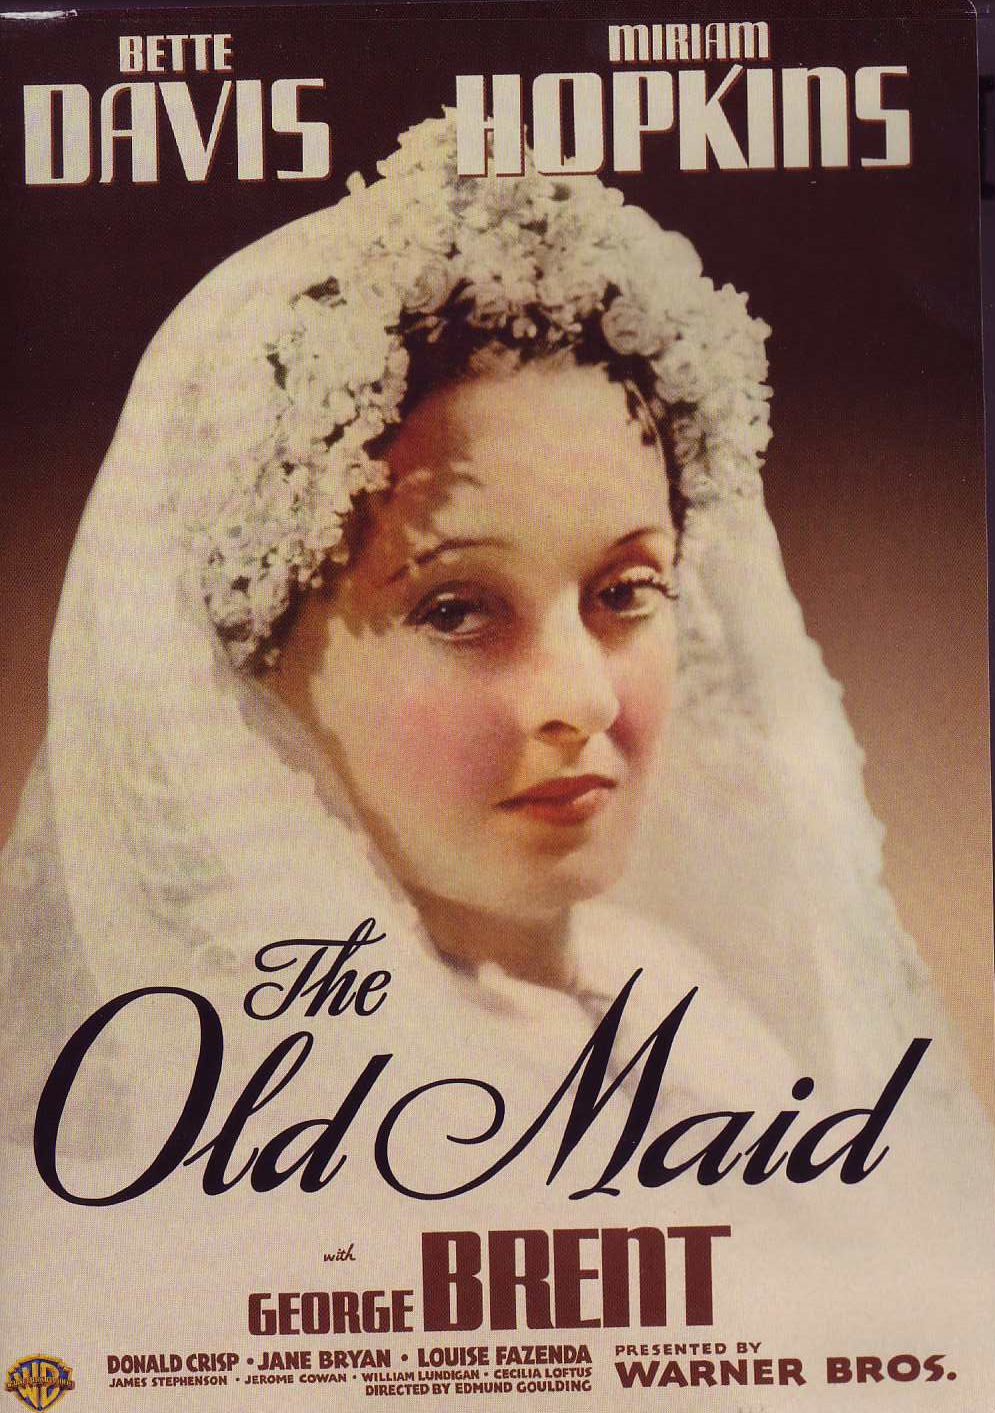 The Old Maid movie